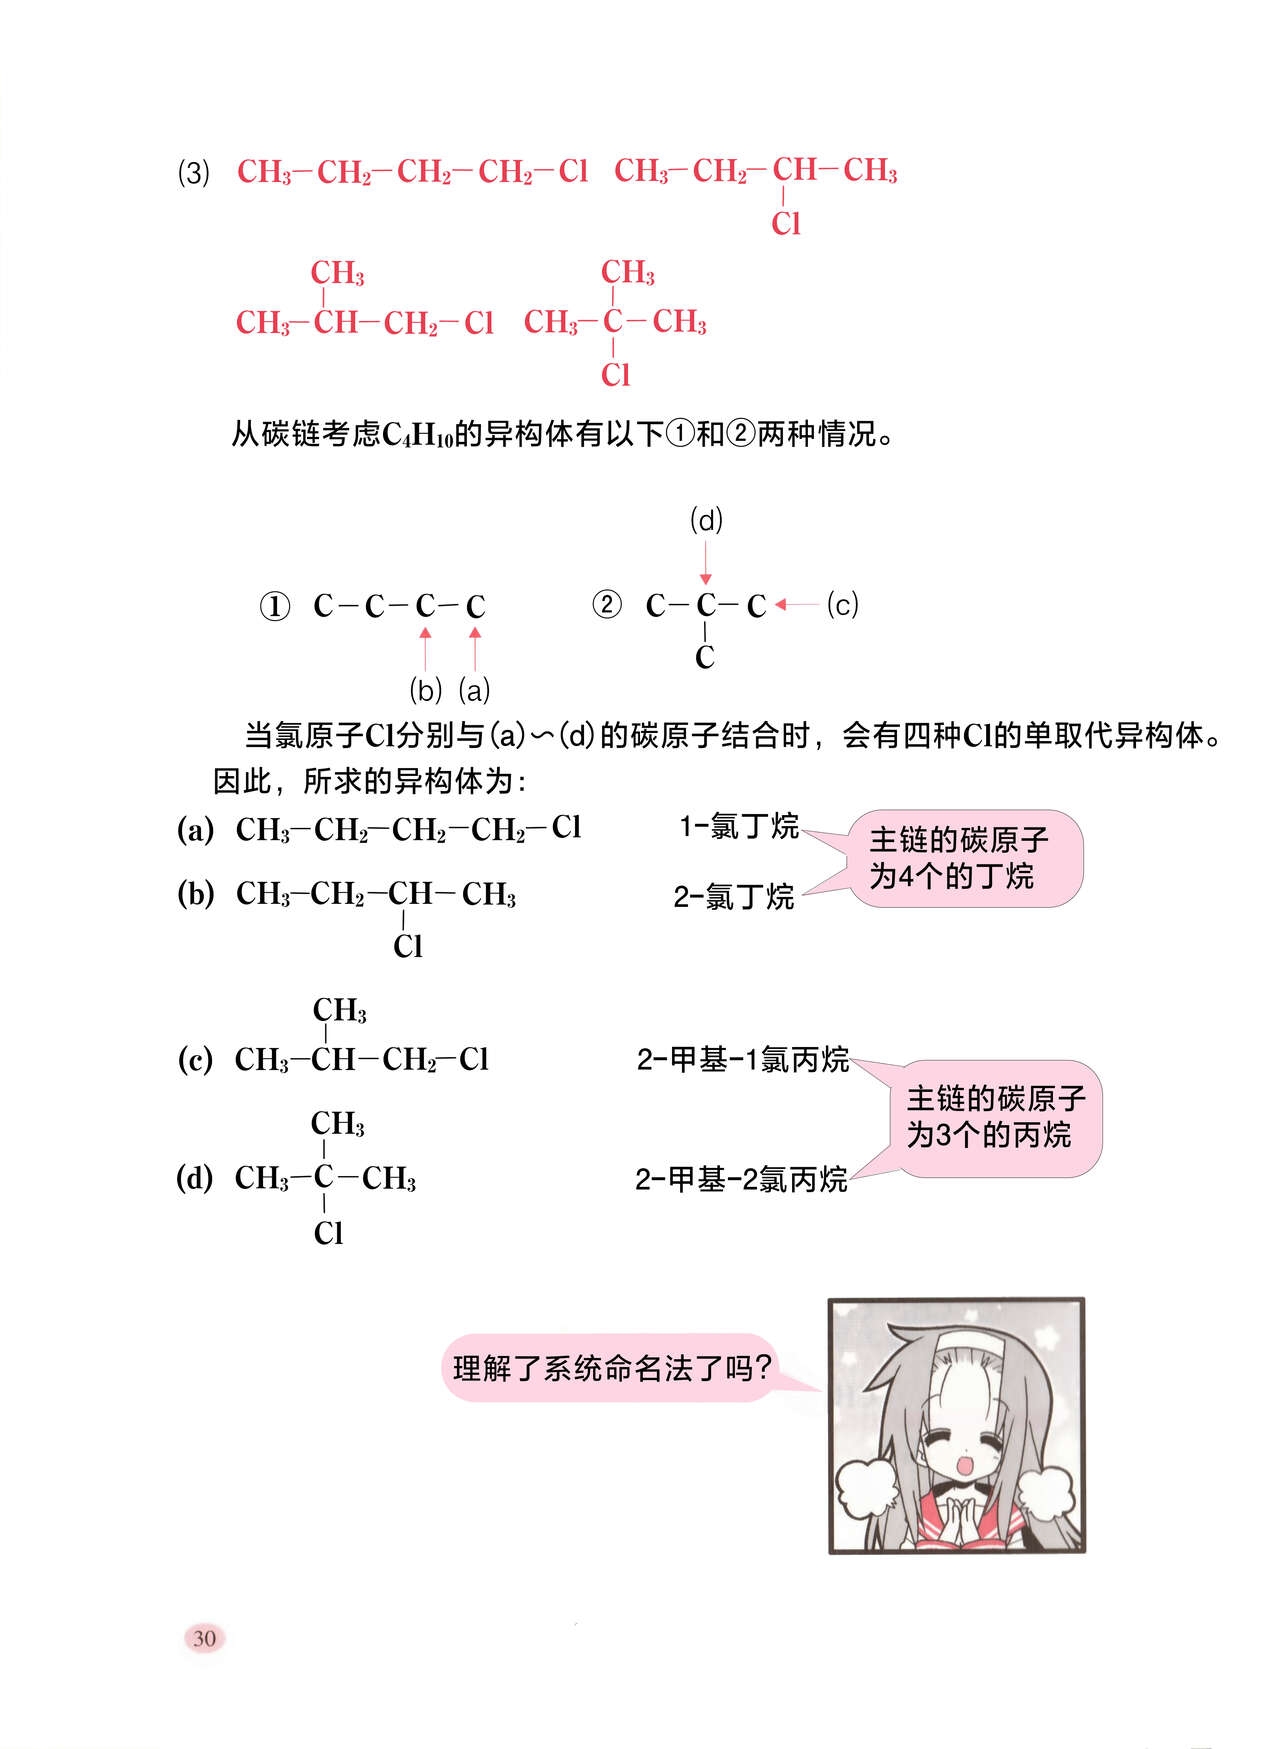 Let's Learn Chemistry with Lucky☆Star -organic matter- Section 1|和幸运星一起学化学 -有机篇- 第1章[Chinese][砂時計漢化組] 38